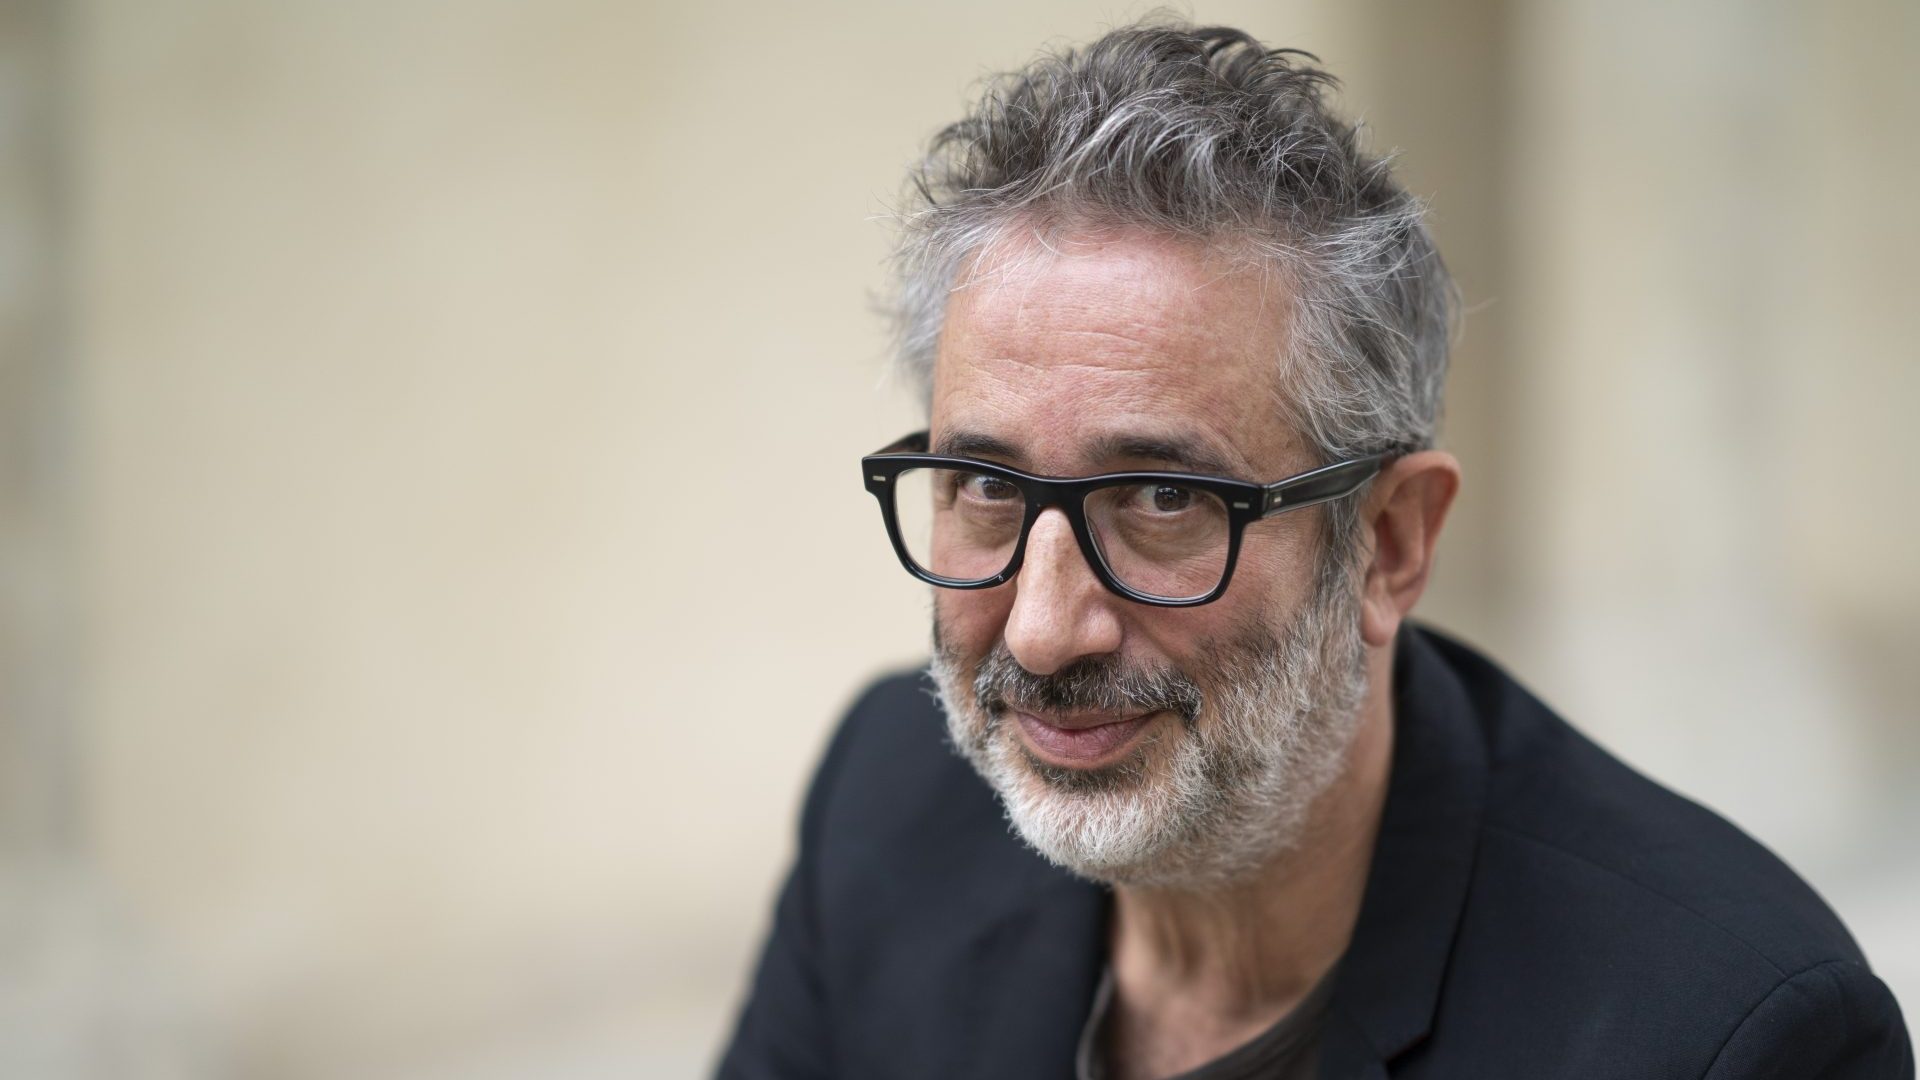 David Baddiel writes that any damage he suffered in his childhood was ‘accidental sculpture’. Photo: David Levenson/Getty